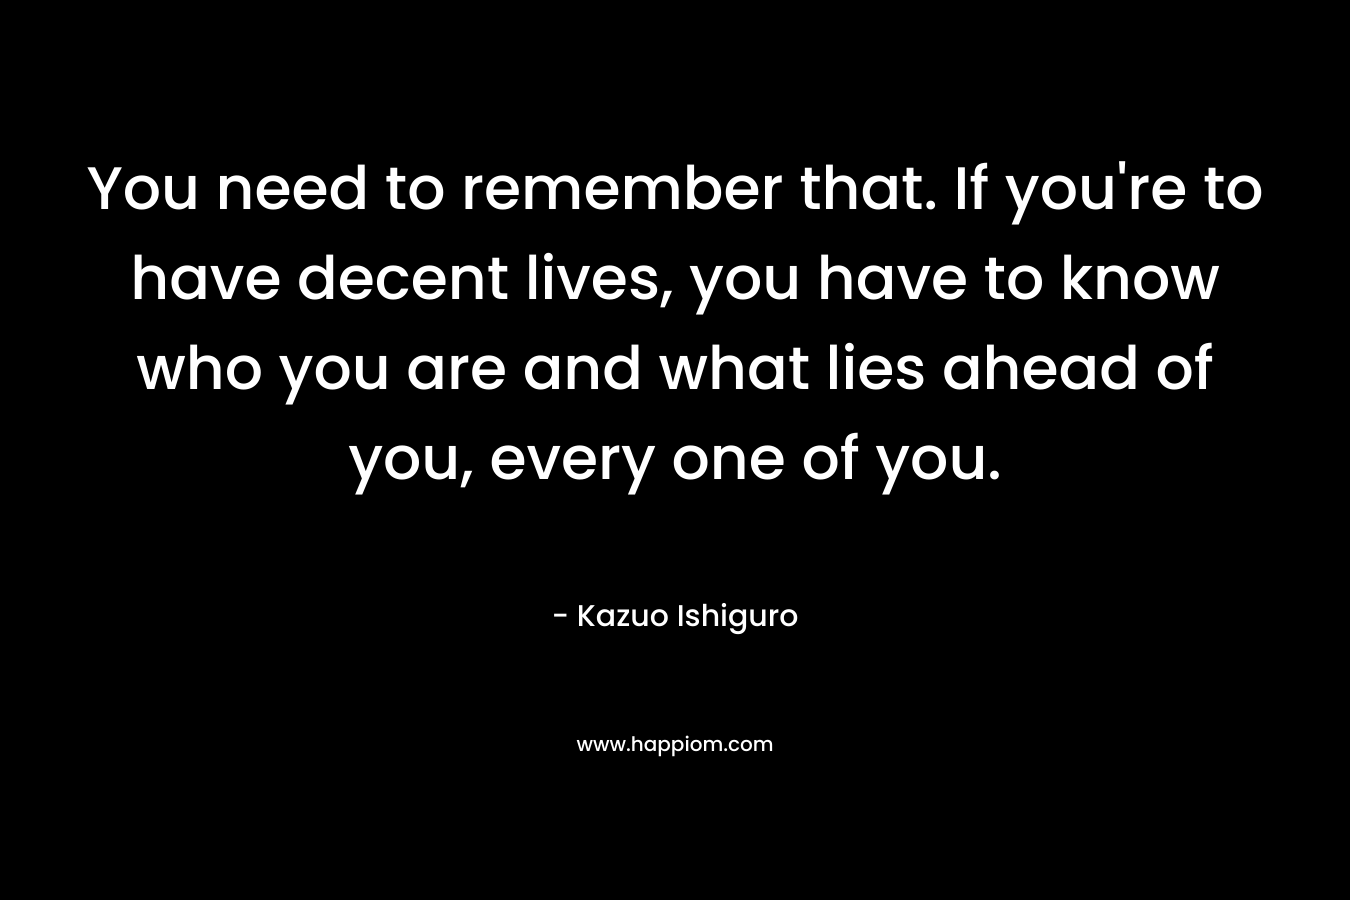 You need to remember that. If you’re to have decent lives, you have to know who you are and what lies ahead of you, every one of you. – Kazuo Ishiguro